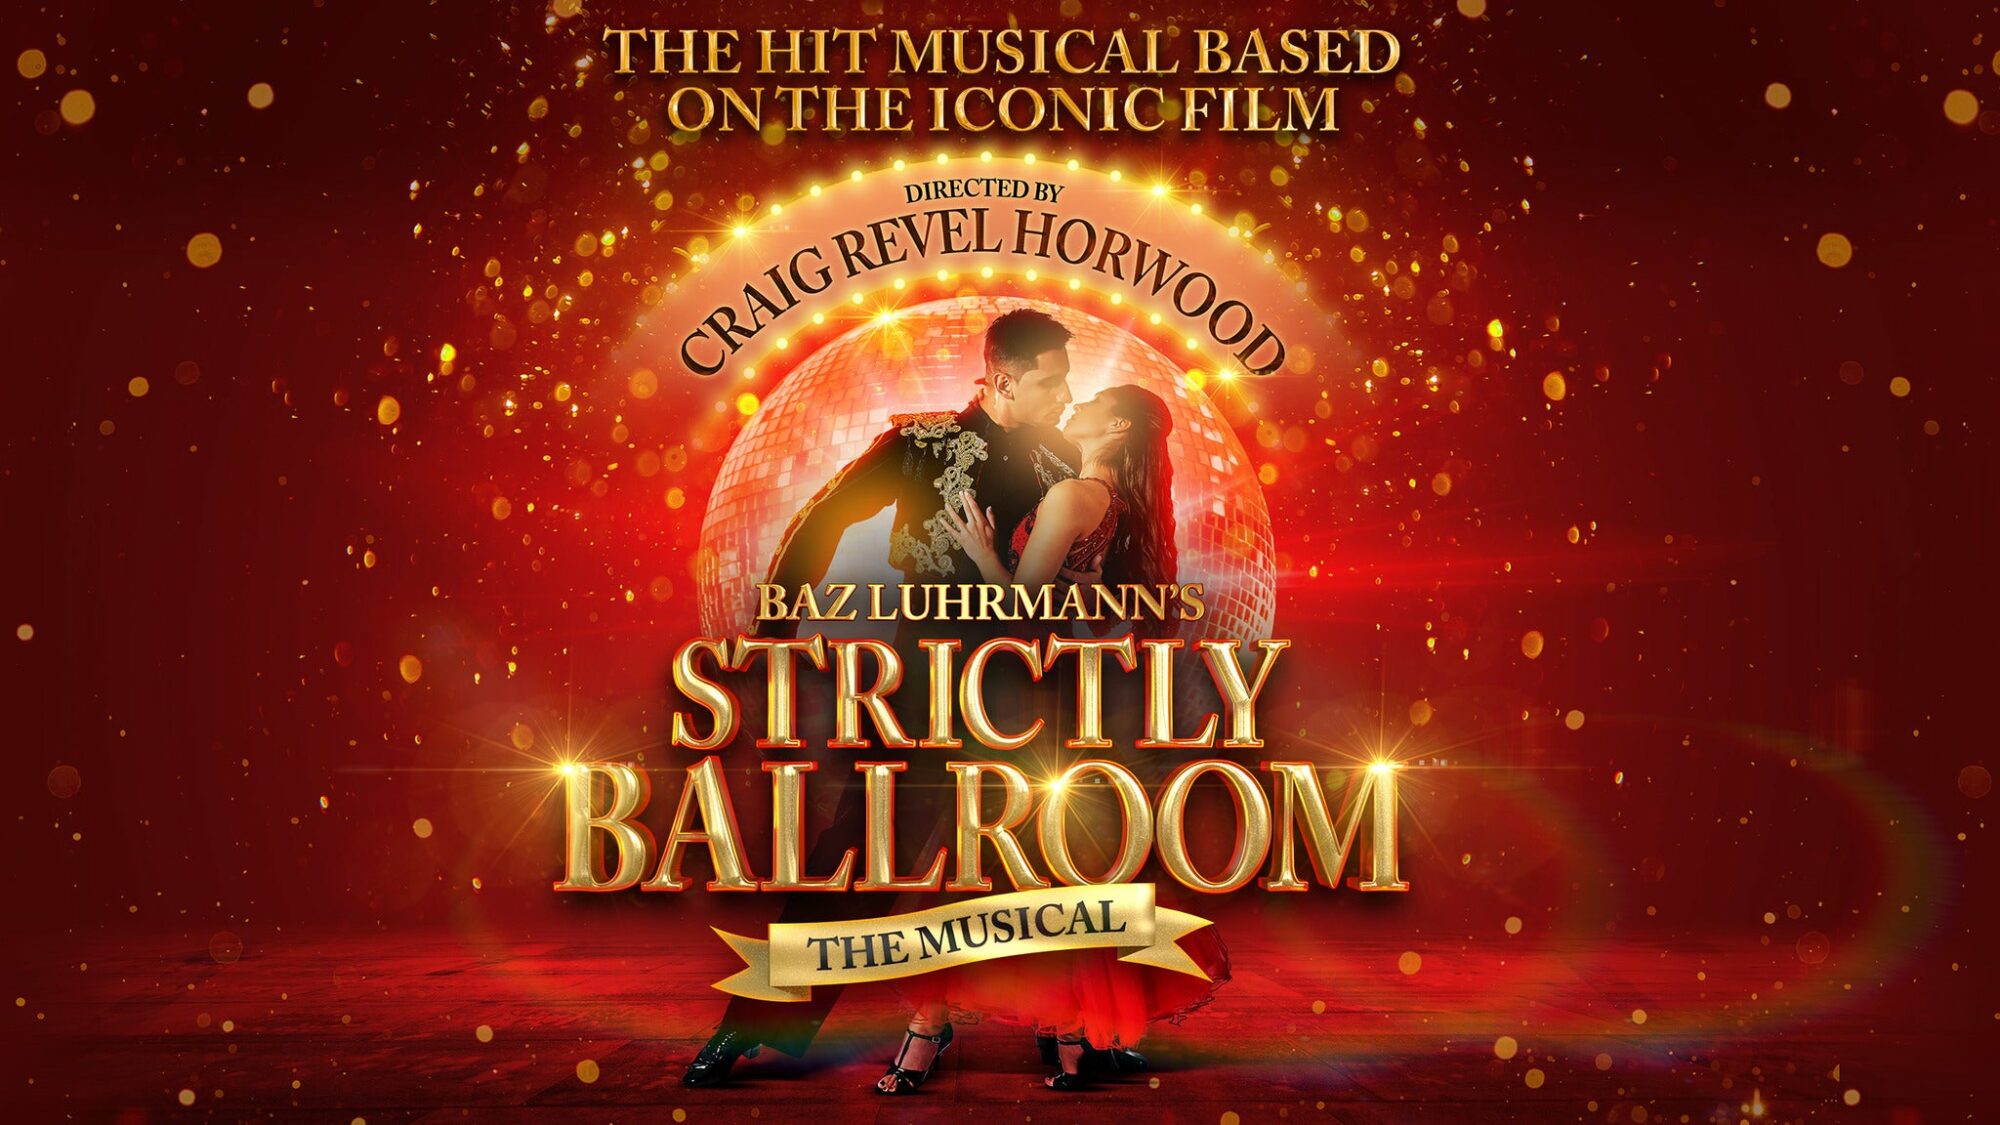 Image name Strictly Ballroom The Musical at Hull New Theatre Hull the 5 image from the post Events in Yorkshire.com.